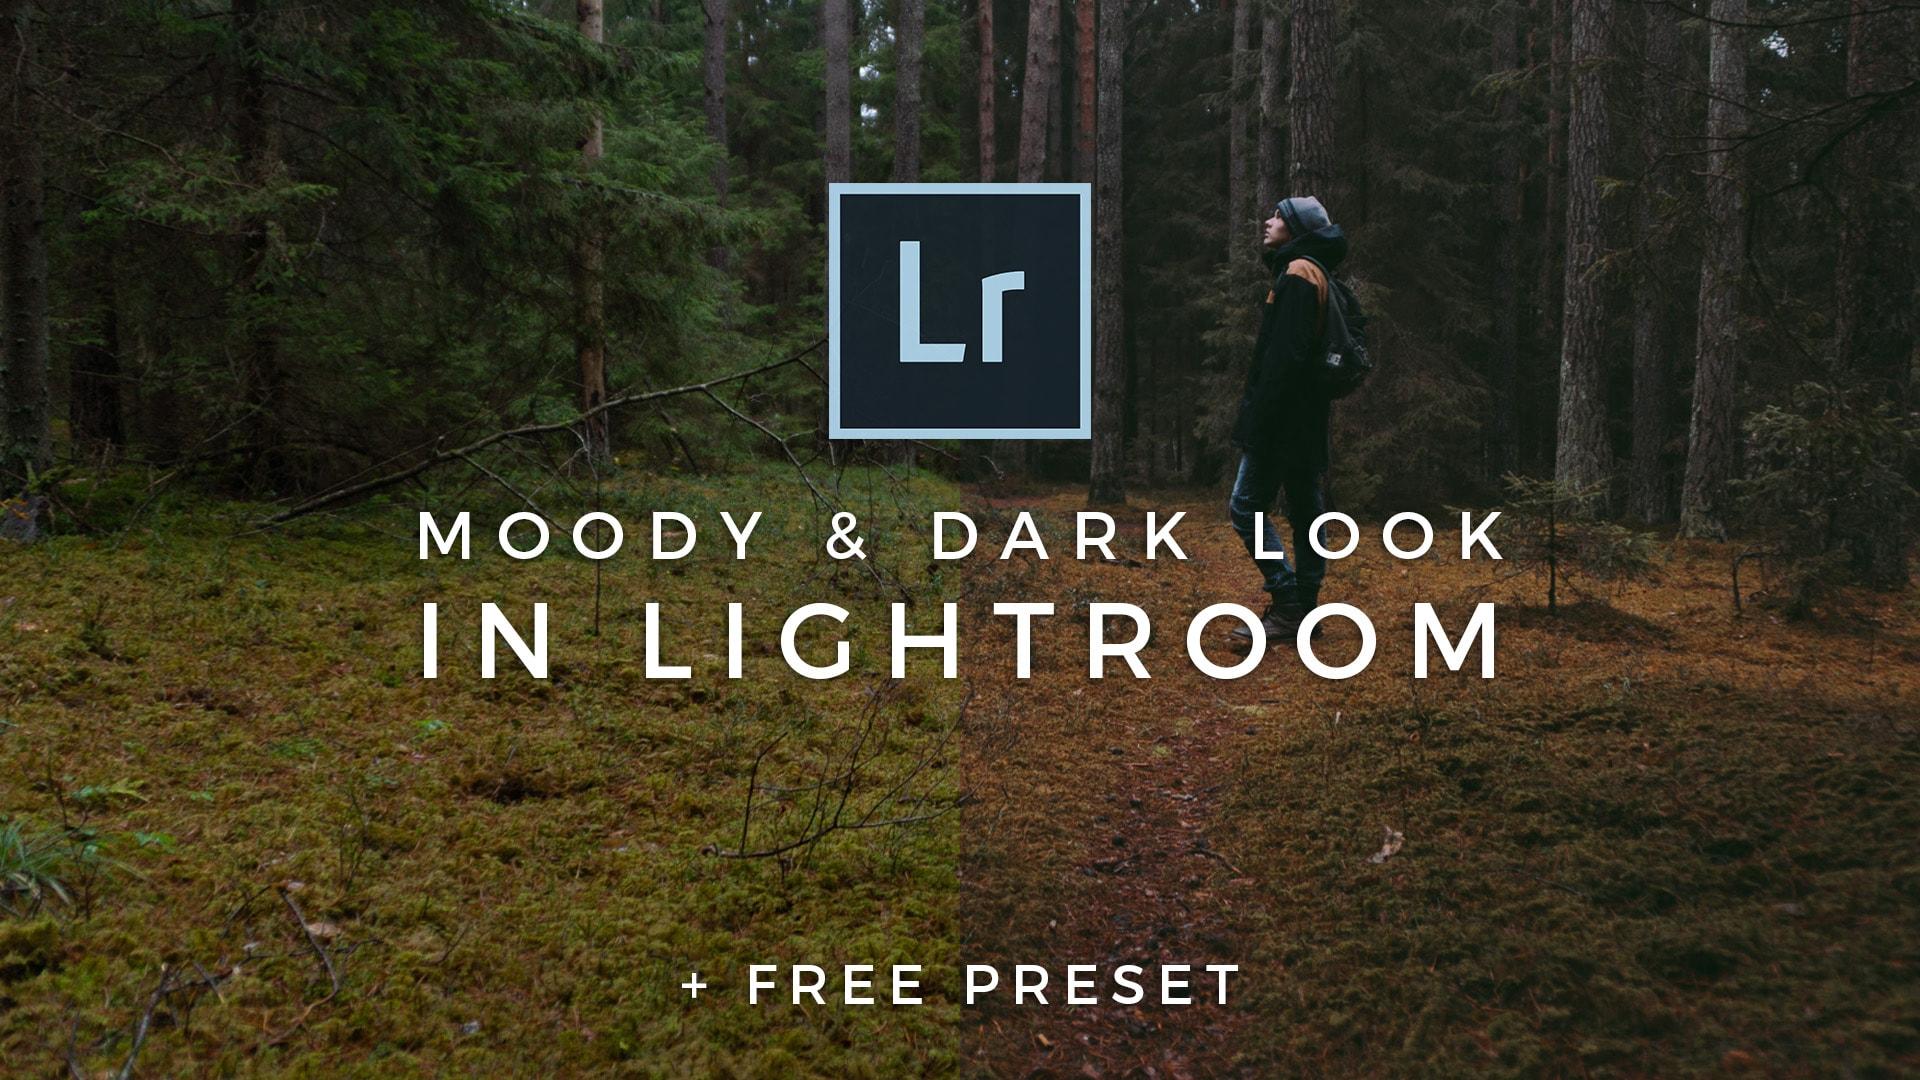 How To Get Lightroom For Free Mac